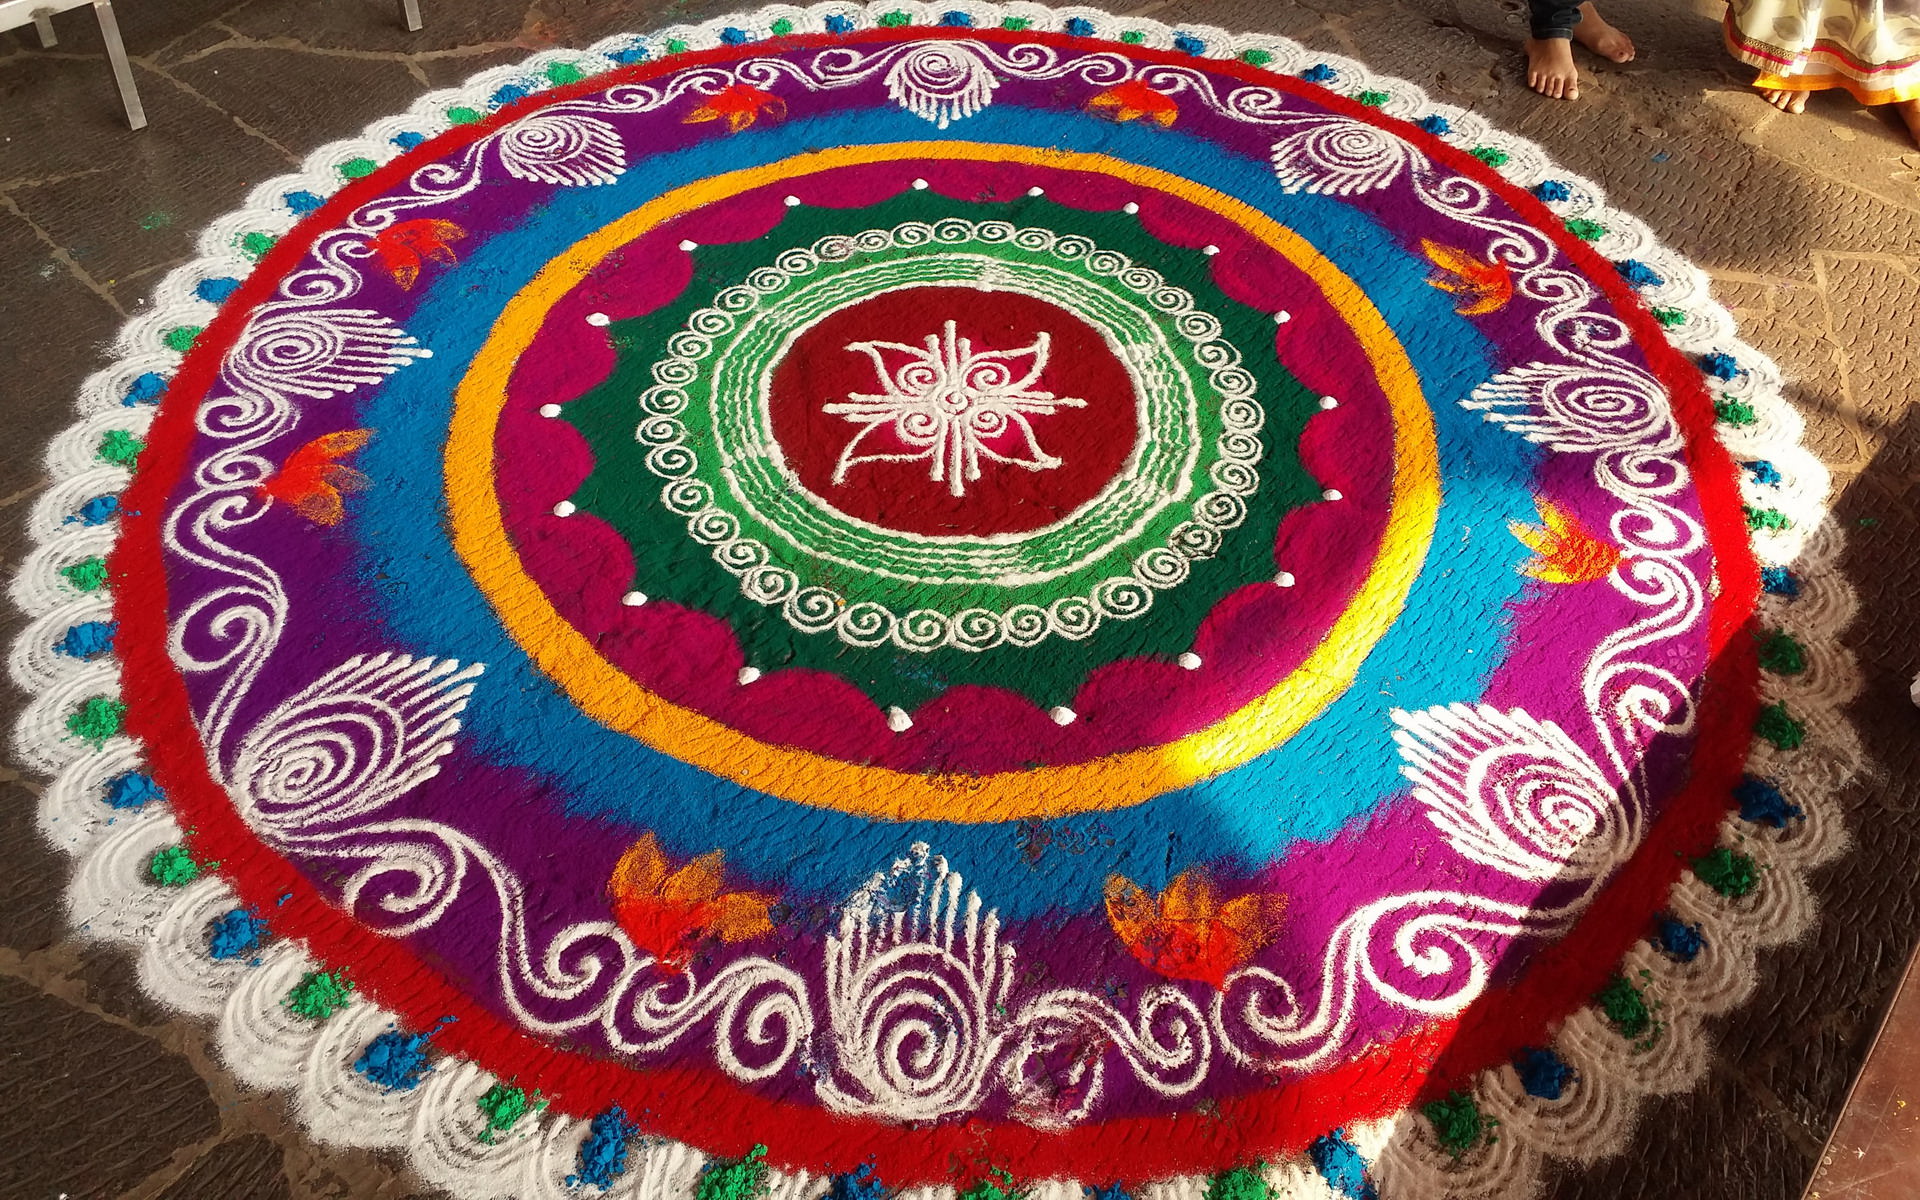 Rangoli Is A Indian Art Of Floor Decorations With Color - Circle - HD Wallpaper 